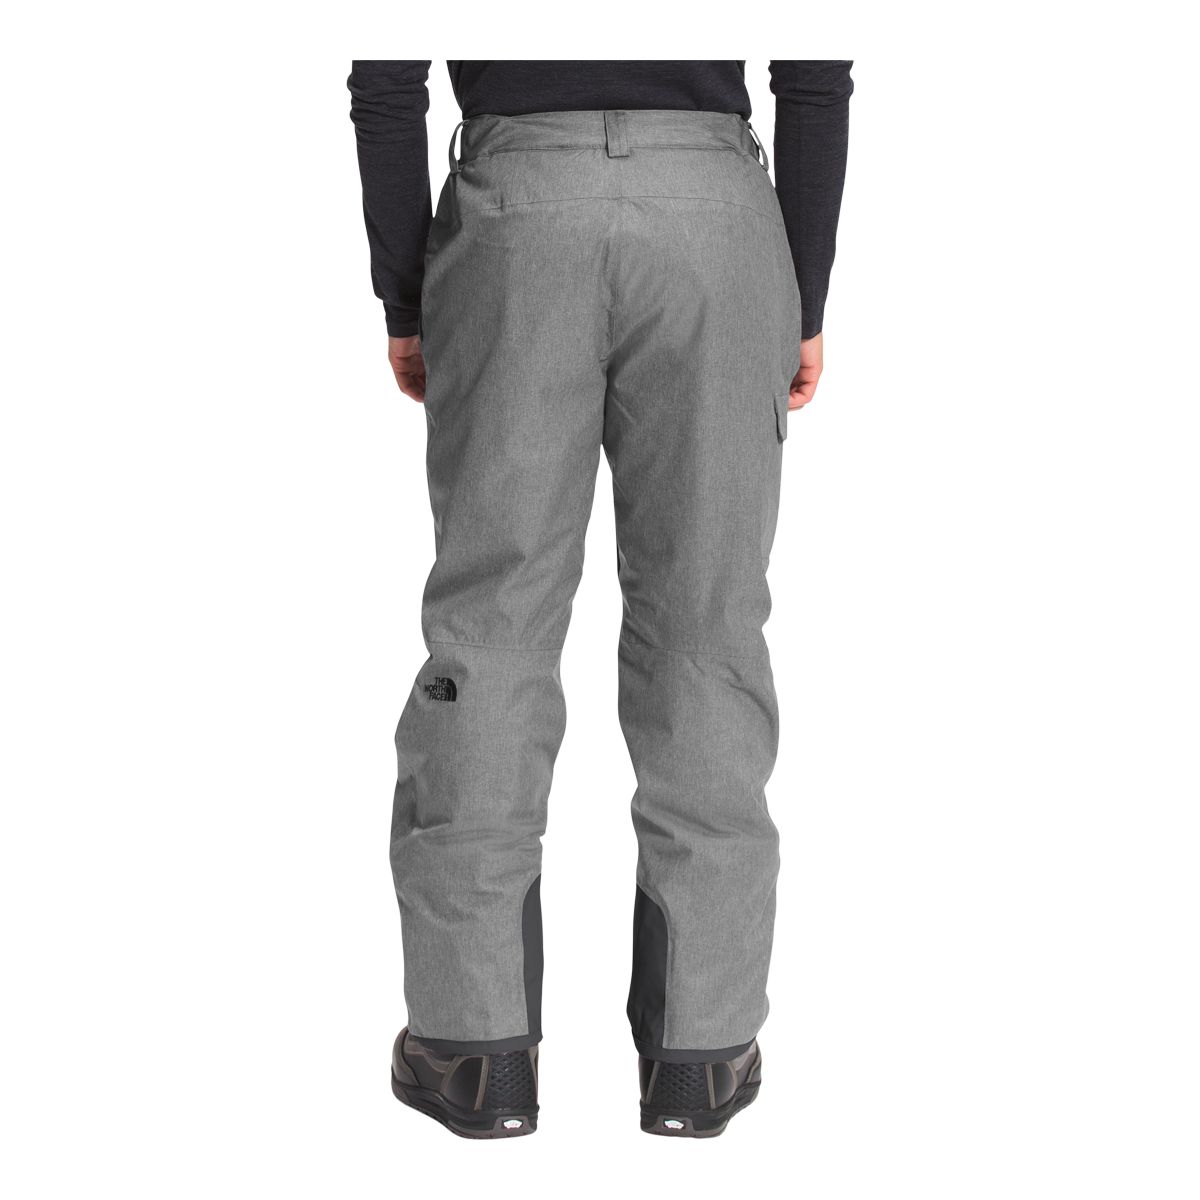 https://media-www.sportchek.ca/product/div-03-softgoods/dpt-76-outerwear/sdpt-01-mens/333861926/the-north-face-mens-freedom-insulated-pant-0922--52d91b7e-9211-45e8-b598-f3b836dbe3ab-jpgrendition.jpg?imdensity=1&imwidth=1244&impolicy=mZoom